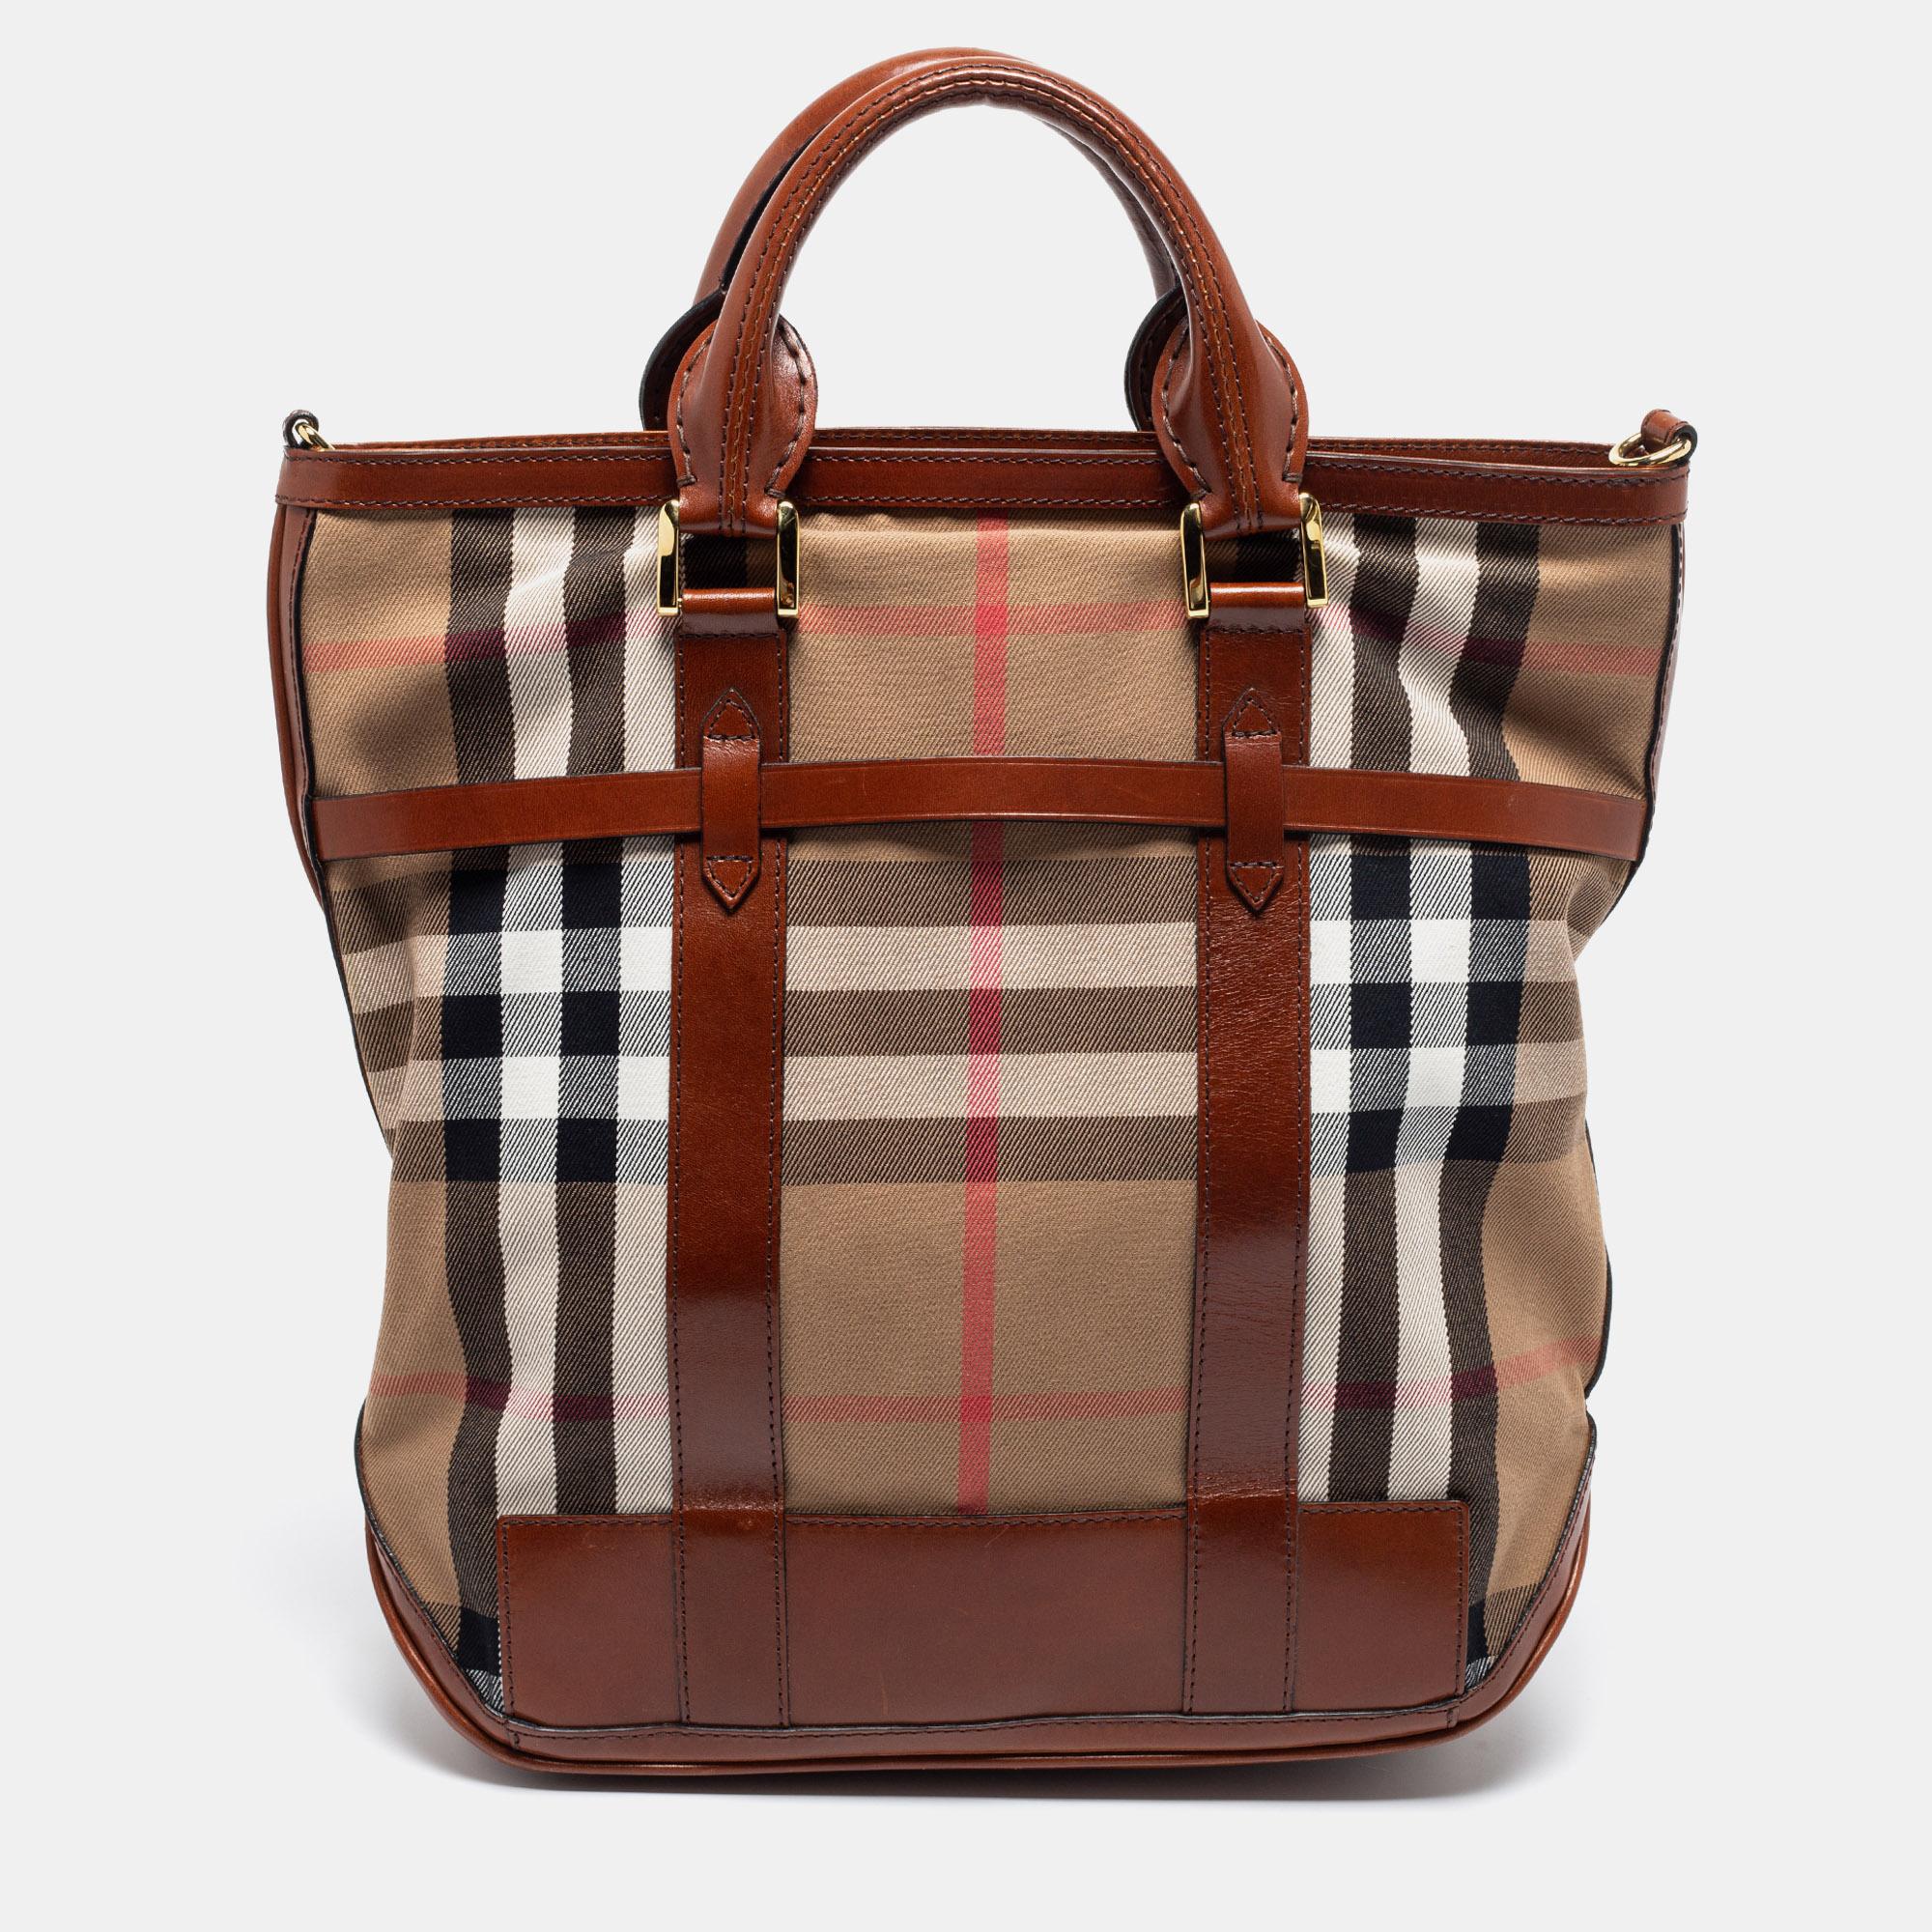 This stylish and functional tote comes from the house of Burberry. Crafted in Italy, this bag has been made from leather and House Check canvas. It is styled with dual handles, a shoulder strap, and gold-tone hardware. It opens to a fabric interior